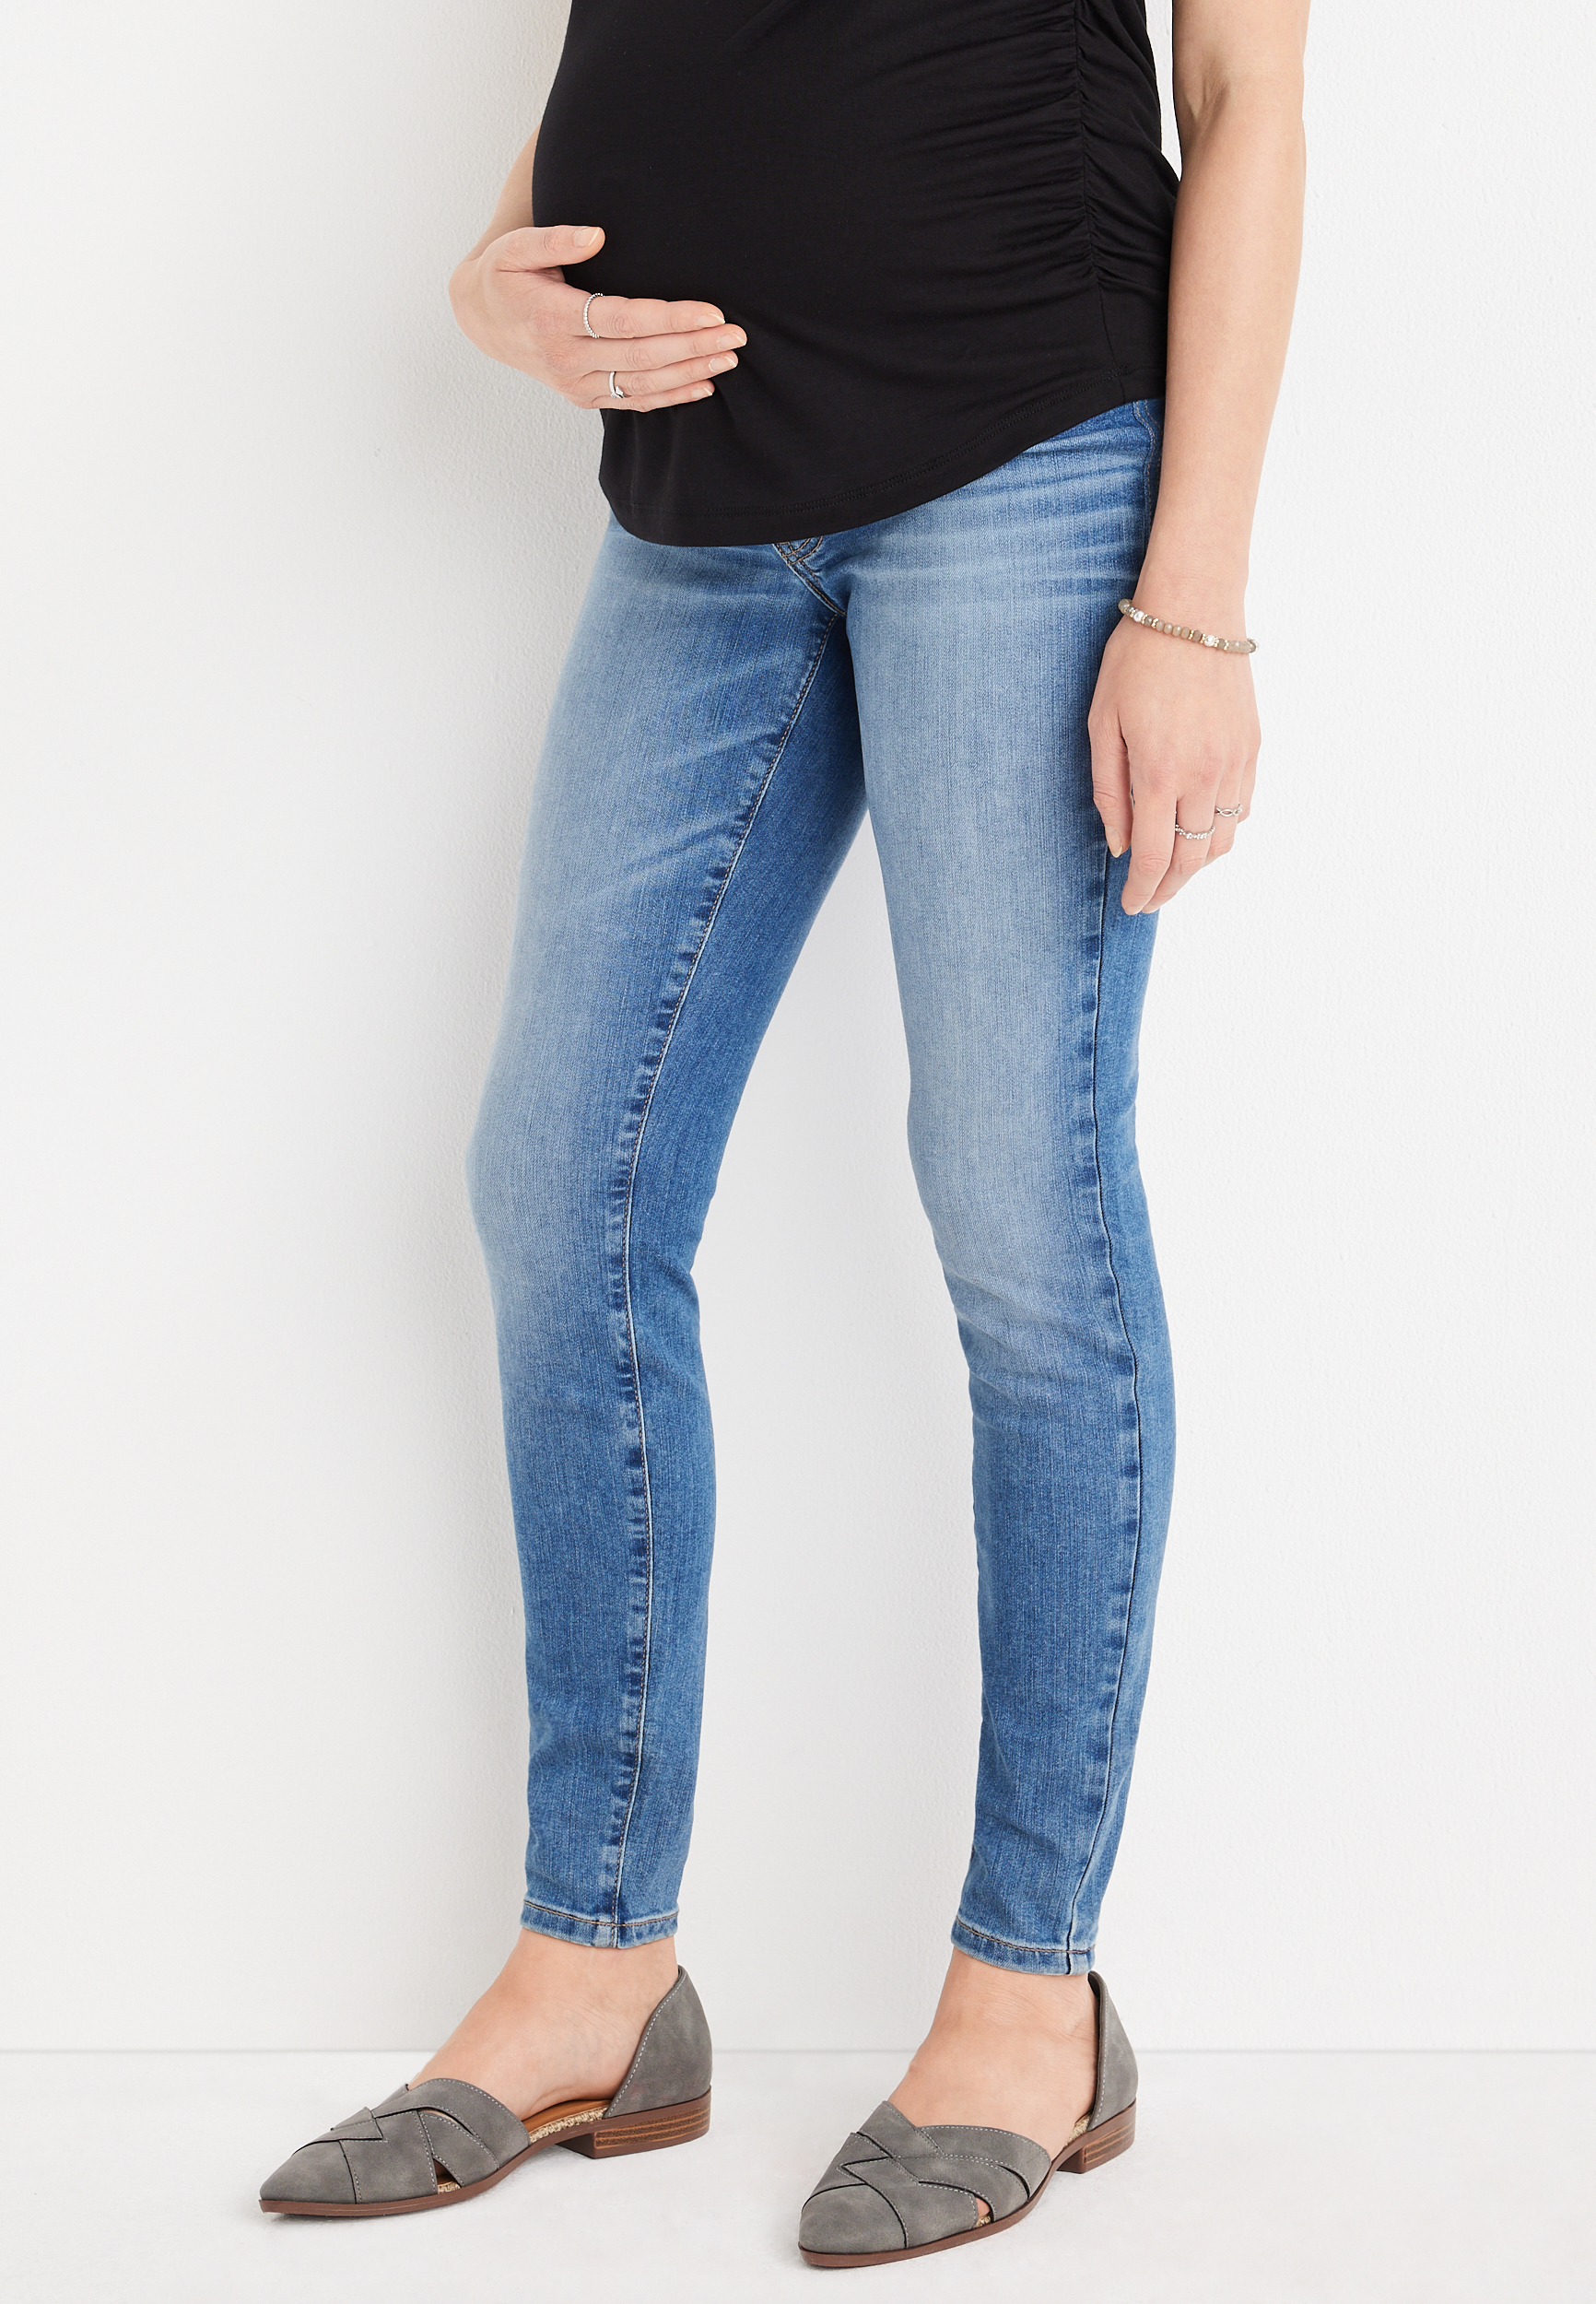 What Are Maternity Jeans? Why Do You Need Them?